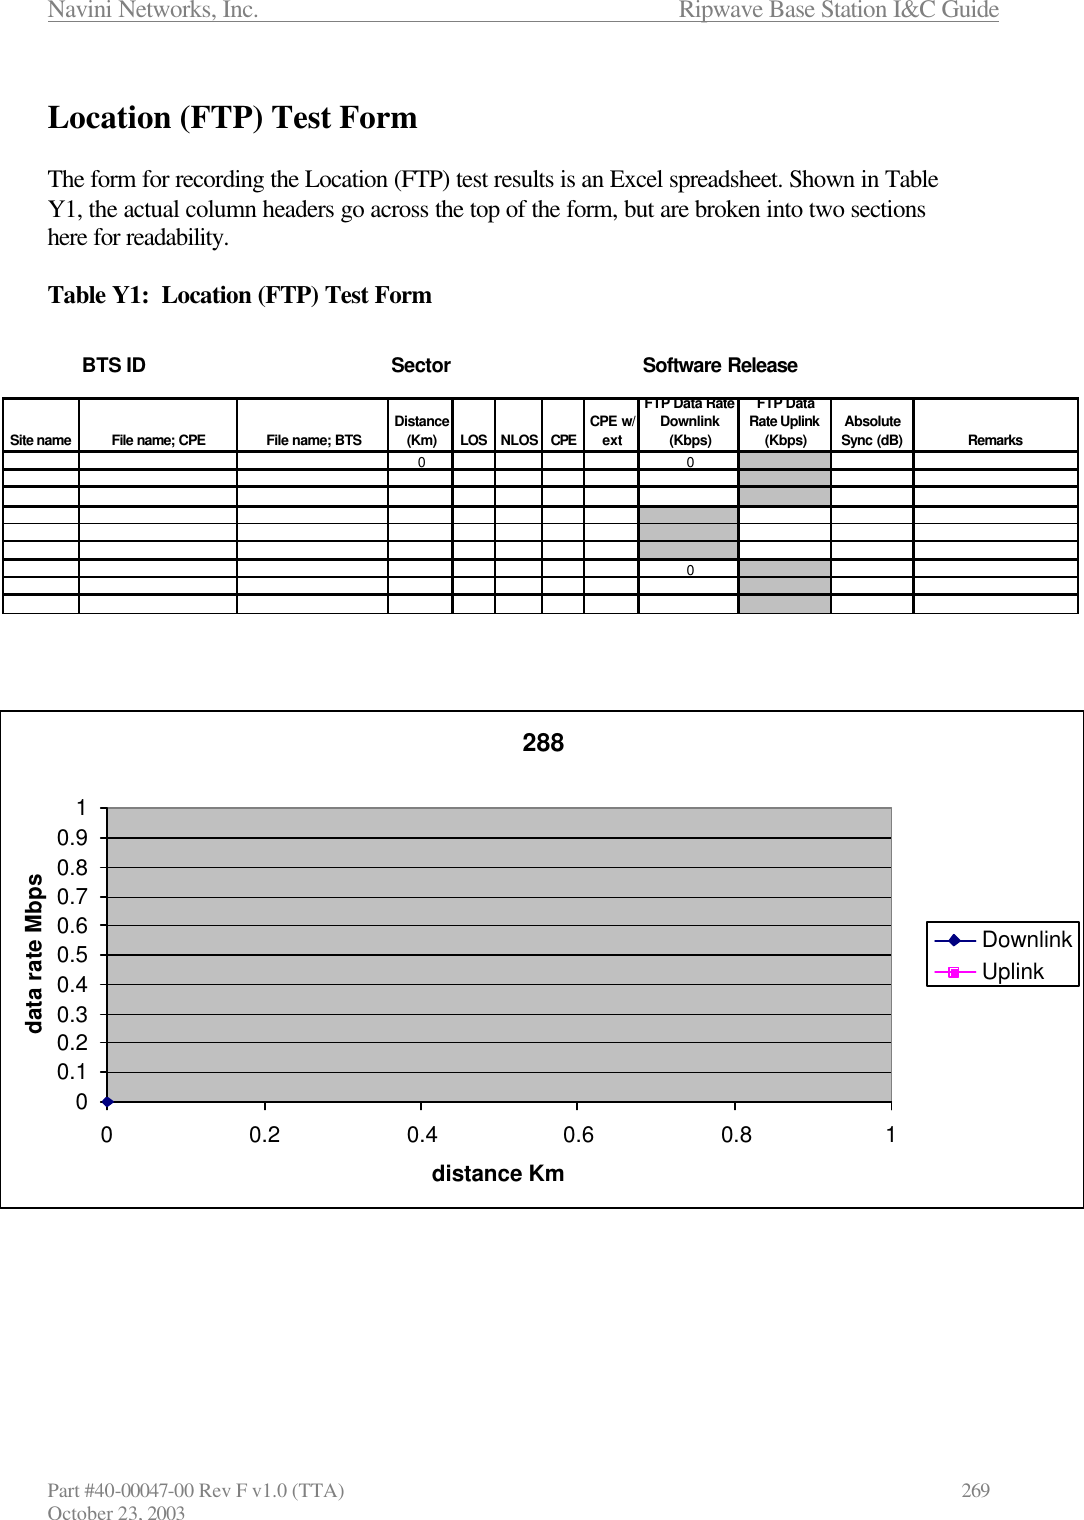 Navini Networks, Inc.                      Ripwave Base Station I&amp;C Guide Part #40-00047-00 Rev F v1.0 (TTA)            269 October 23, 2003  Location (FTP) Test Form  The form for recording the Location (FTP) test results is an Excel spreadsheet. Shown in Table Y1, the actual column headers go across the top of the form, but are broken into two sections here for readability.  Table Y1:  Location (FTP) Test Form     BTS ID Sector Software ReleaseSite name File name; CPE File name; BTSDistance (Km) LOS NLOS CPECPE w/ extFTP Data Rate Downlink (Kbps)FTP Data Rate Uplink (Kbps)Absolute Sync (dB) Remarks0 0028800.10.20.30.40.50.60.70.80.9100.2 0.4 0.6 0.8 1distance Kmdata rate MbpsDownlinkUplink